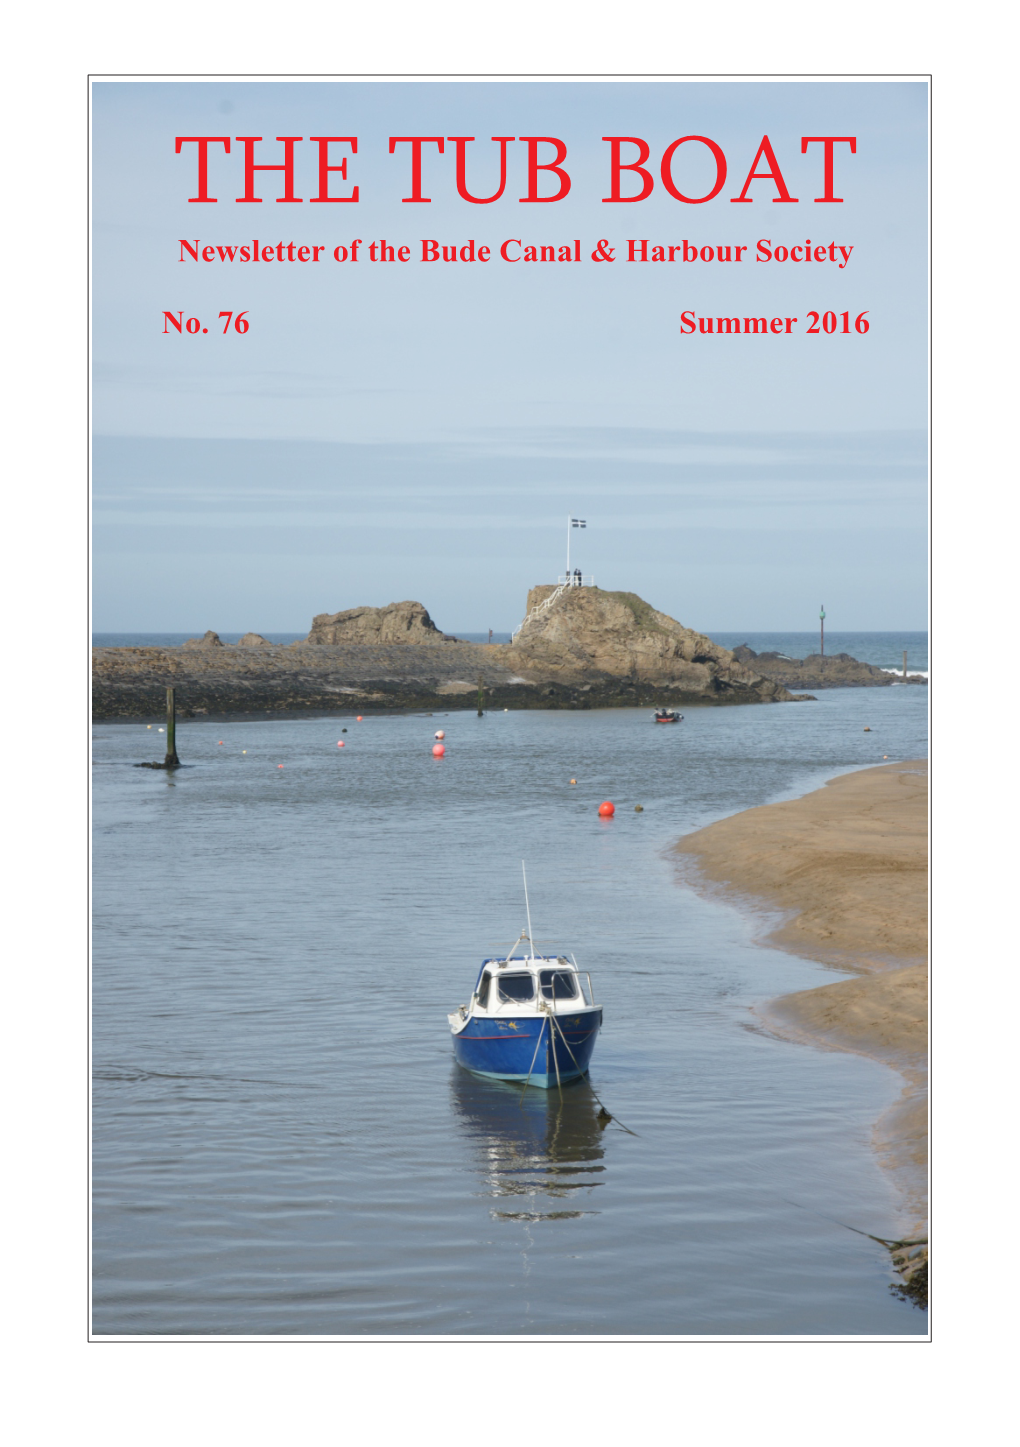 THE TUB BOAT Newsletter of the Bude Canal & Harbour Society